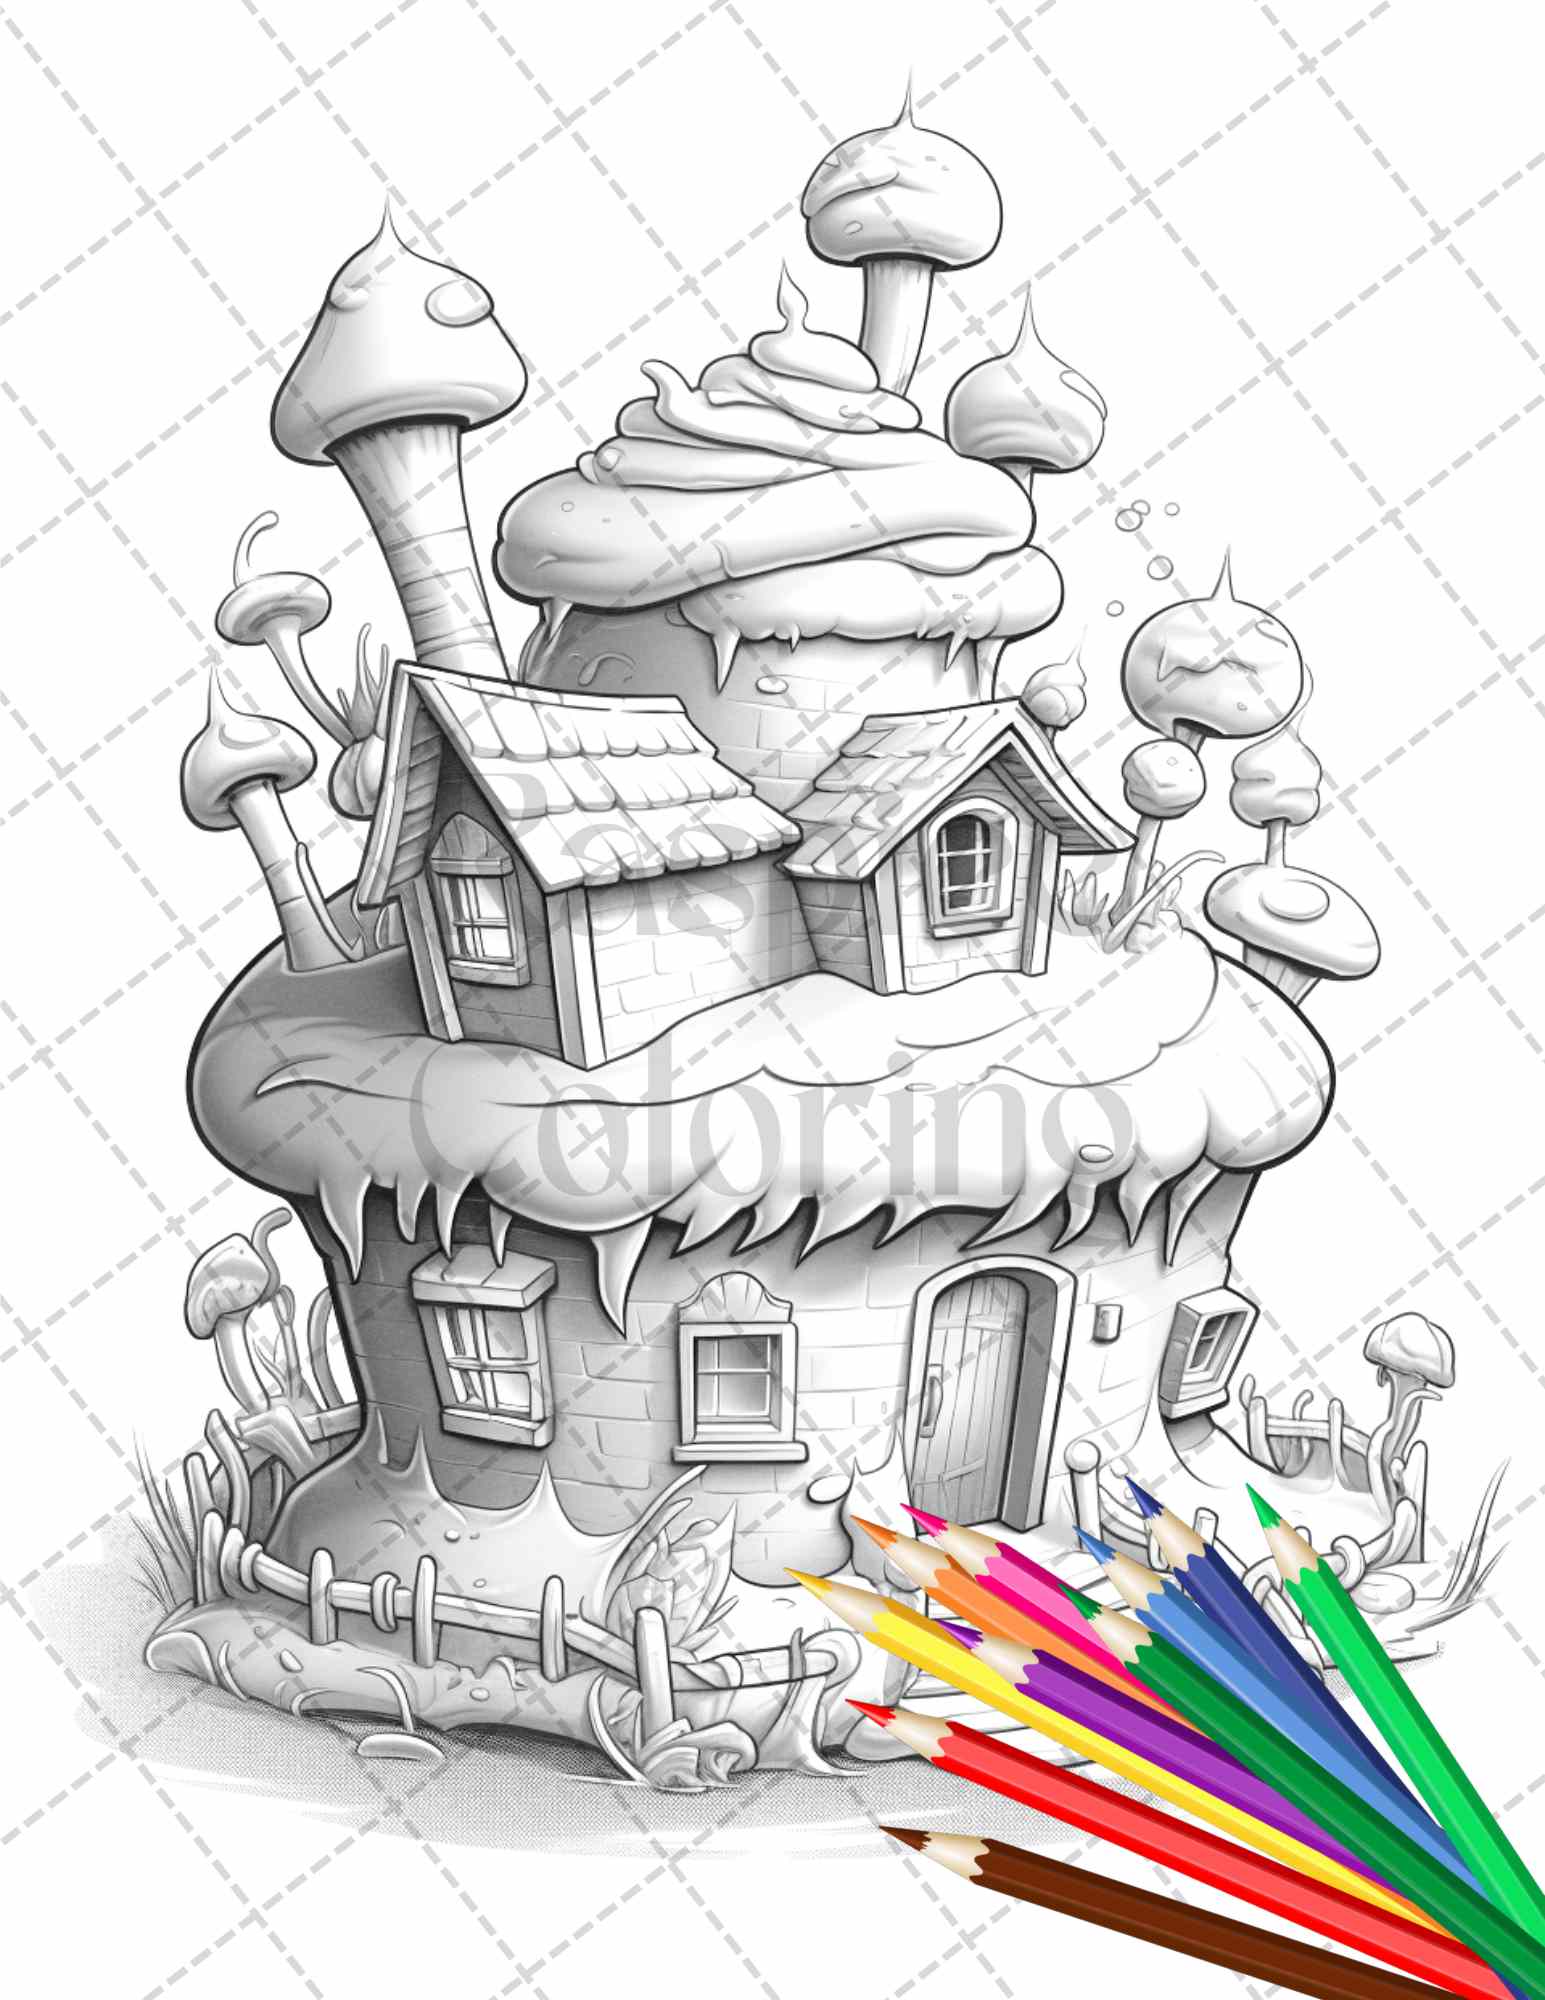 50 Adorable Cake Houses Grayscale Coloring Pages Printable for Adults and Kids, PDF File Instant Download - raspiee